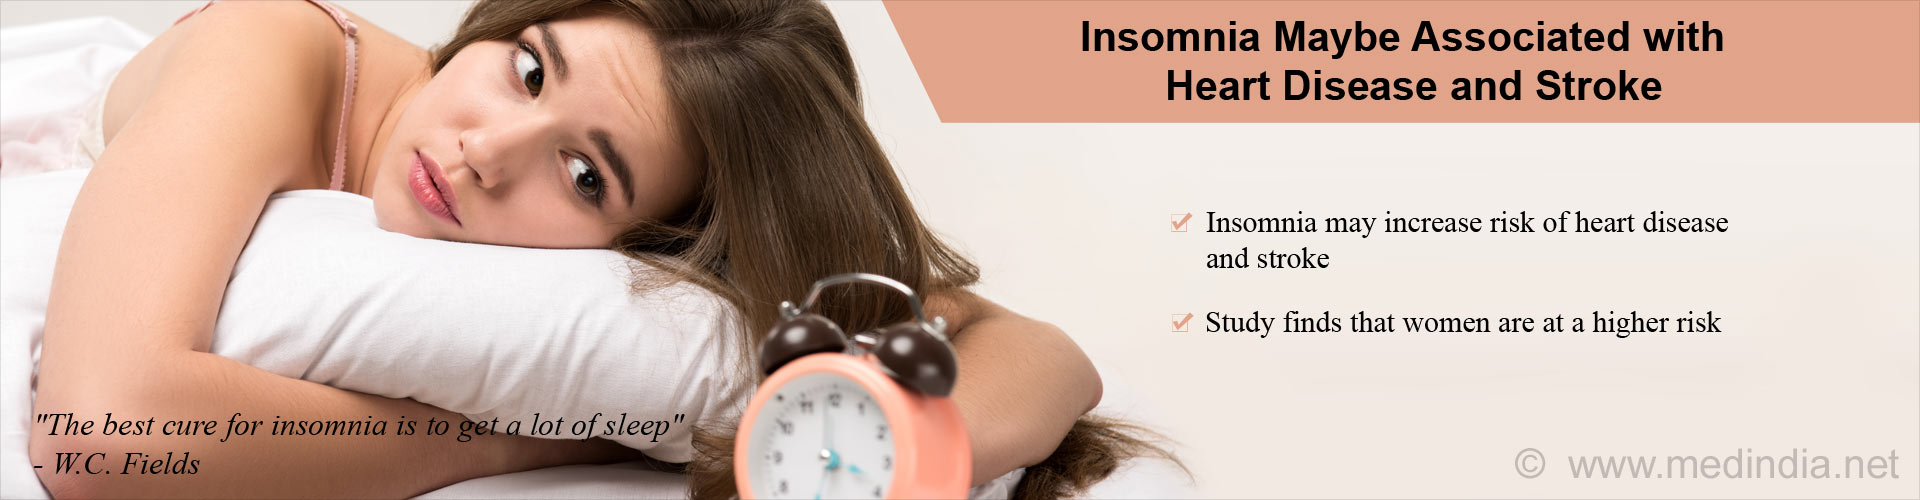 Insomnia Maybe Associated with Heart Disease and Stroke
- Insomnia may increase the risk of heart disease and stroke
- Study finds that women are at a higher risk